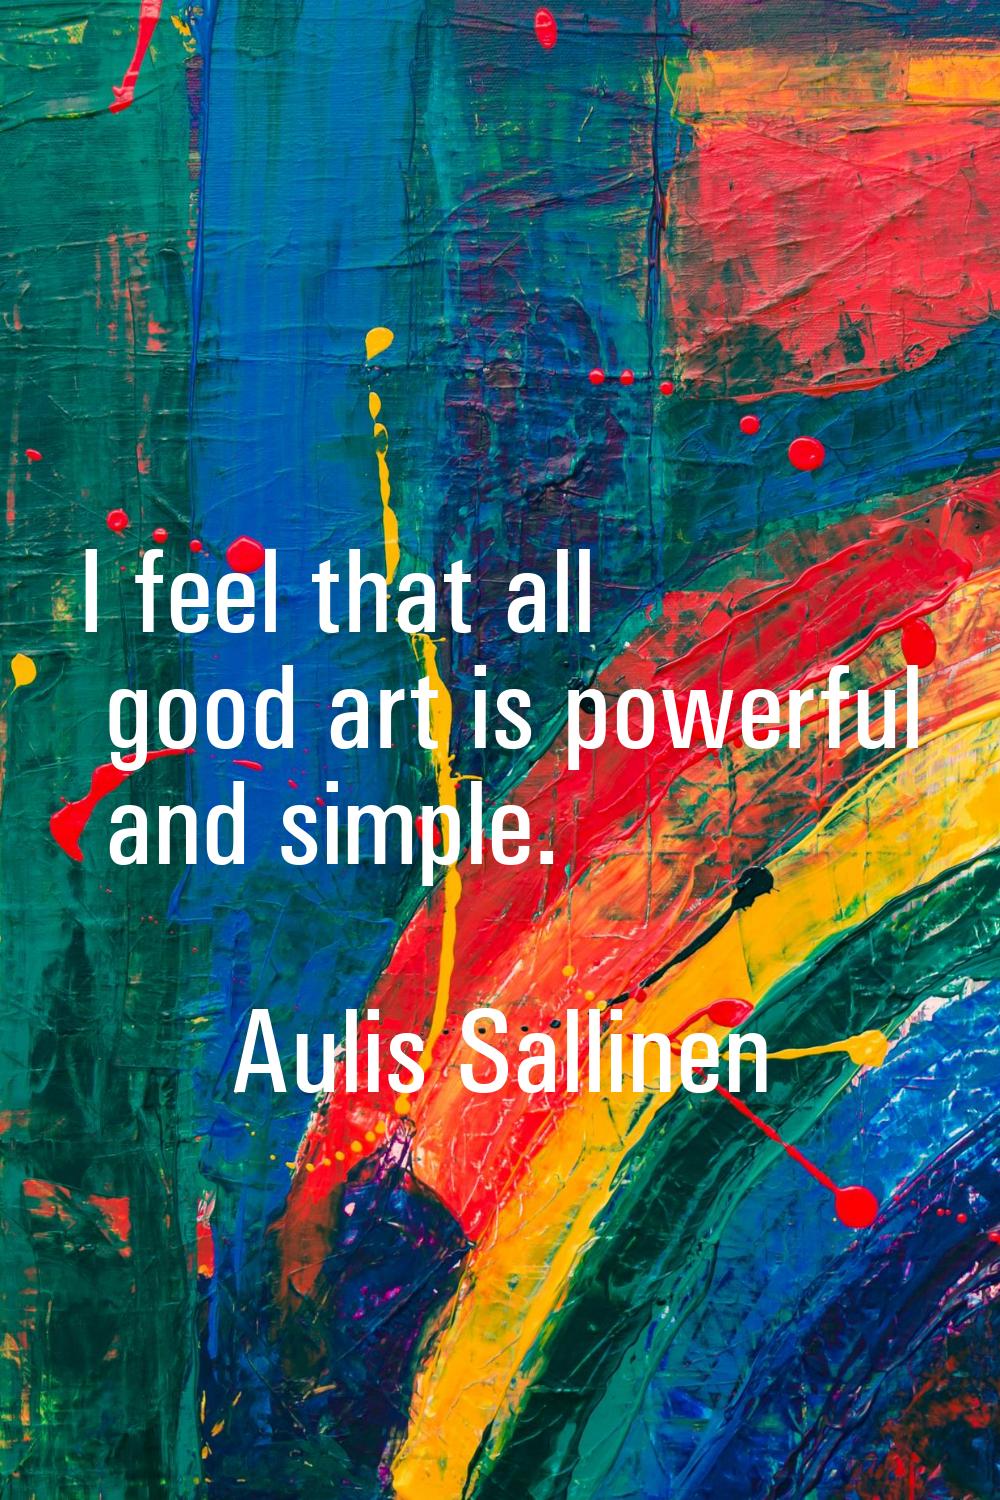 I feel that all good art is powerful and simple.